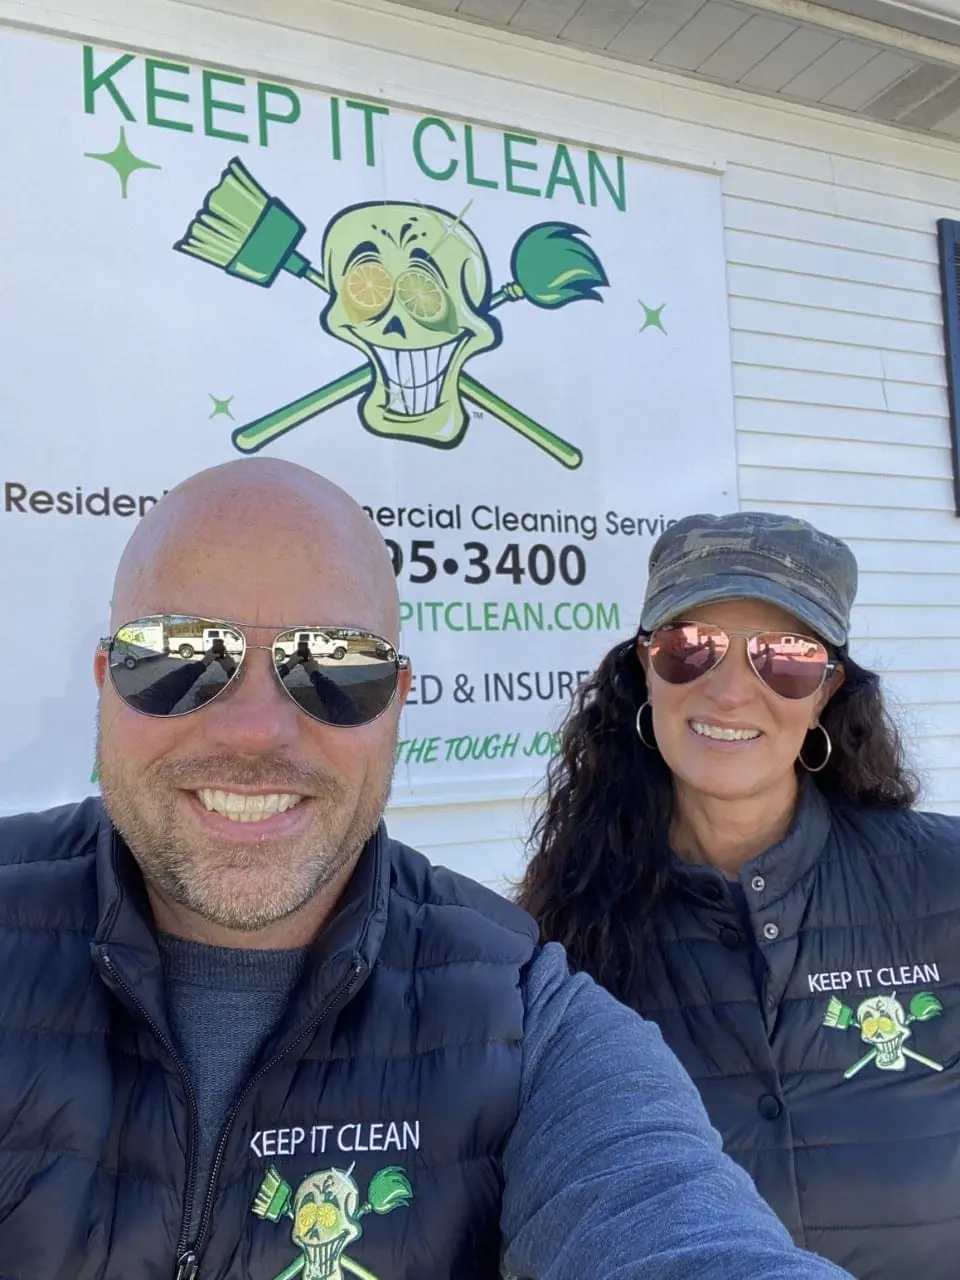 Husband and wife team, founders of Keep It Clean, smiling.